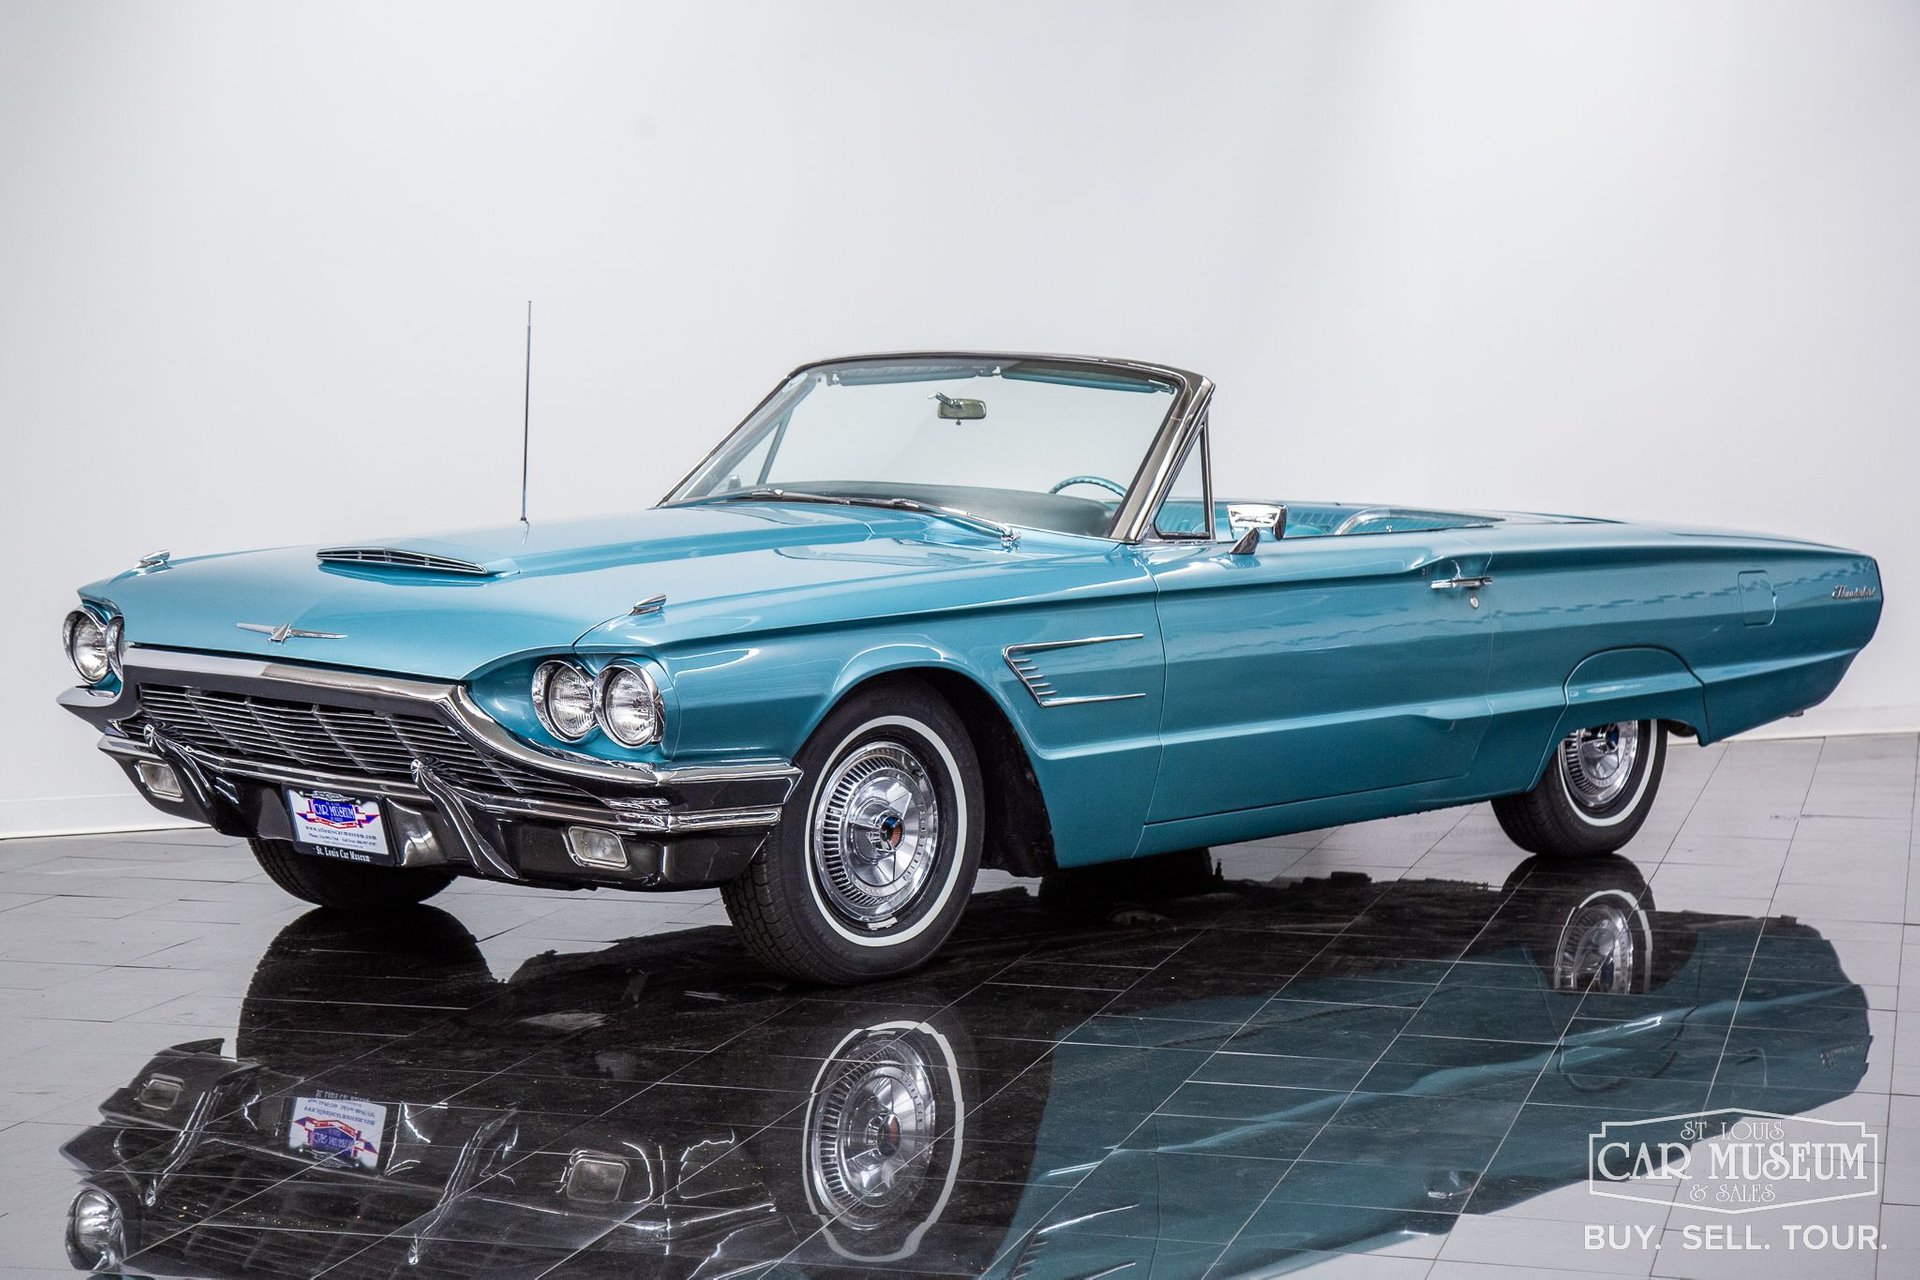 1965 Ford Thunderbird For Sale | St. Louis Car Museum